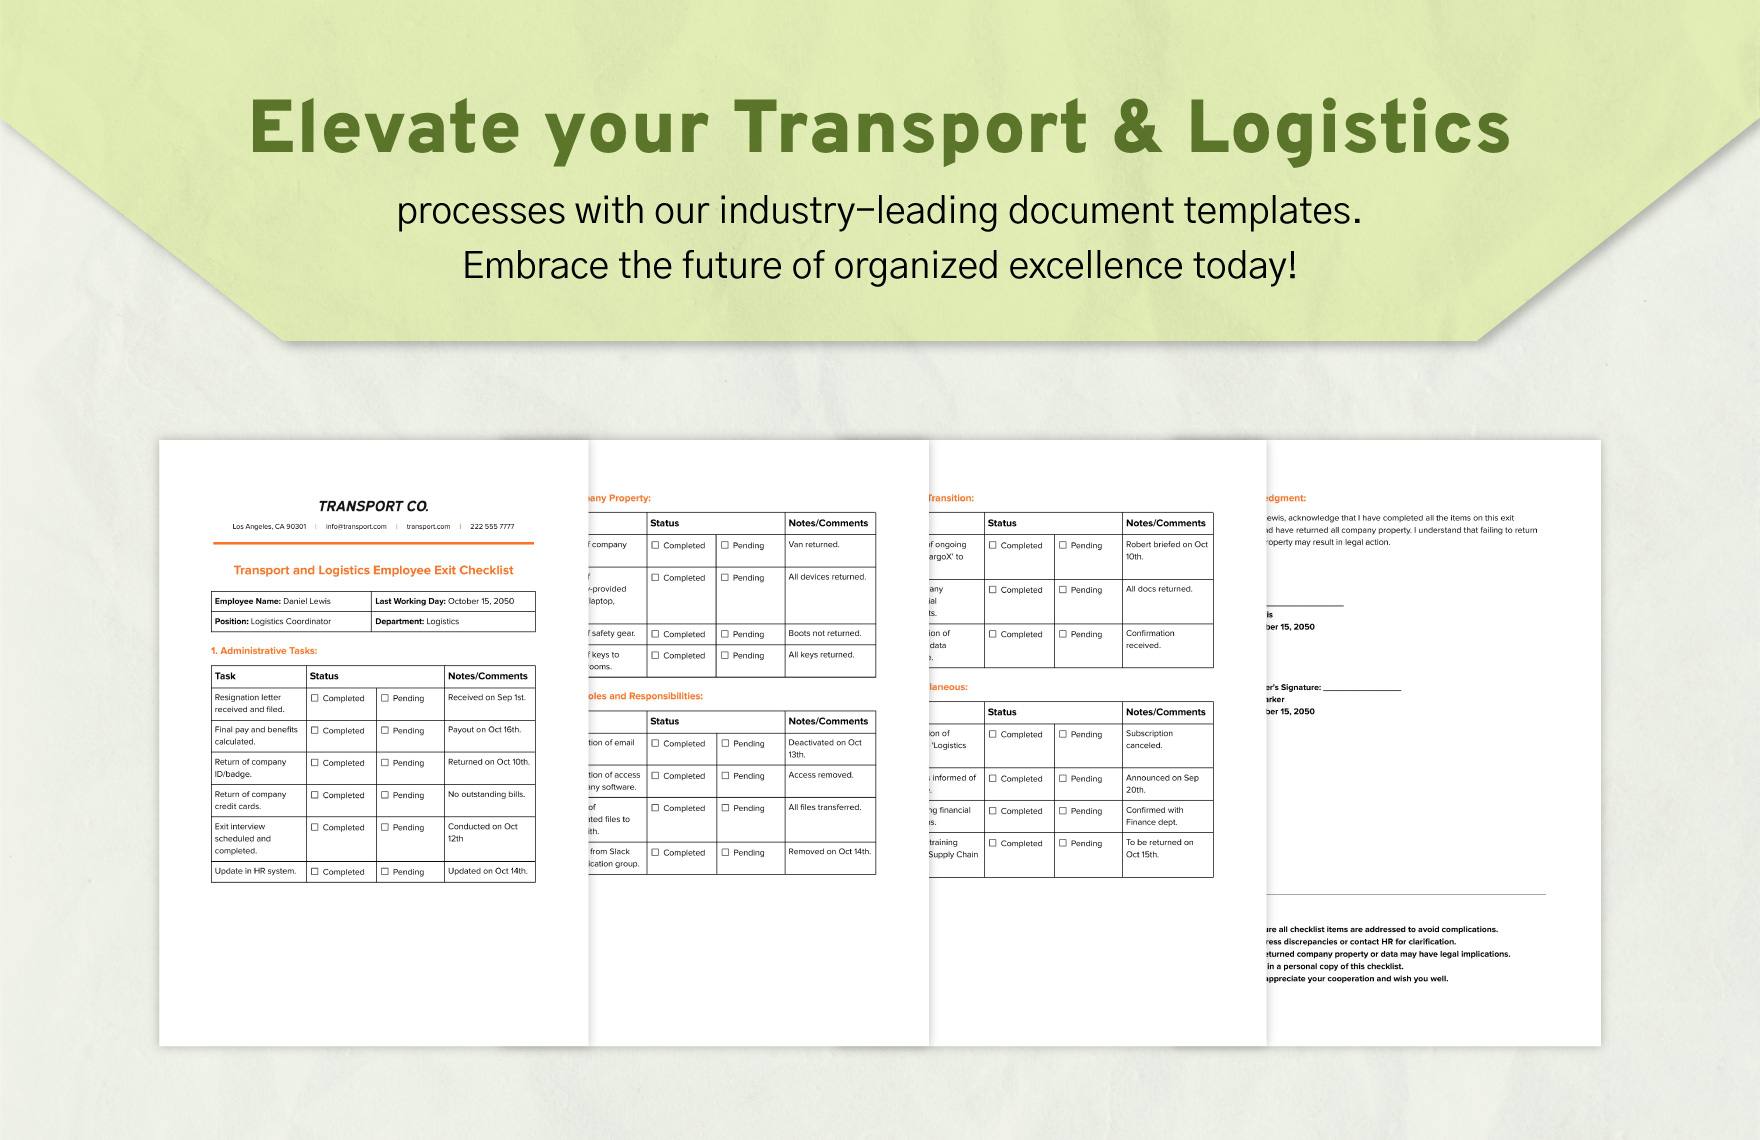 Transport and Logistics Employee Exit Checklist Template